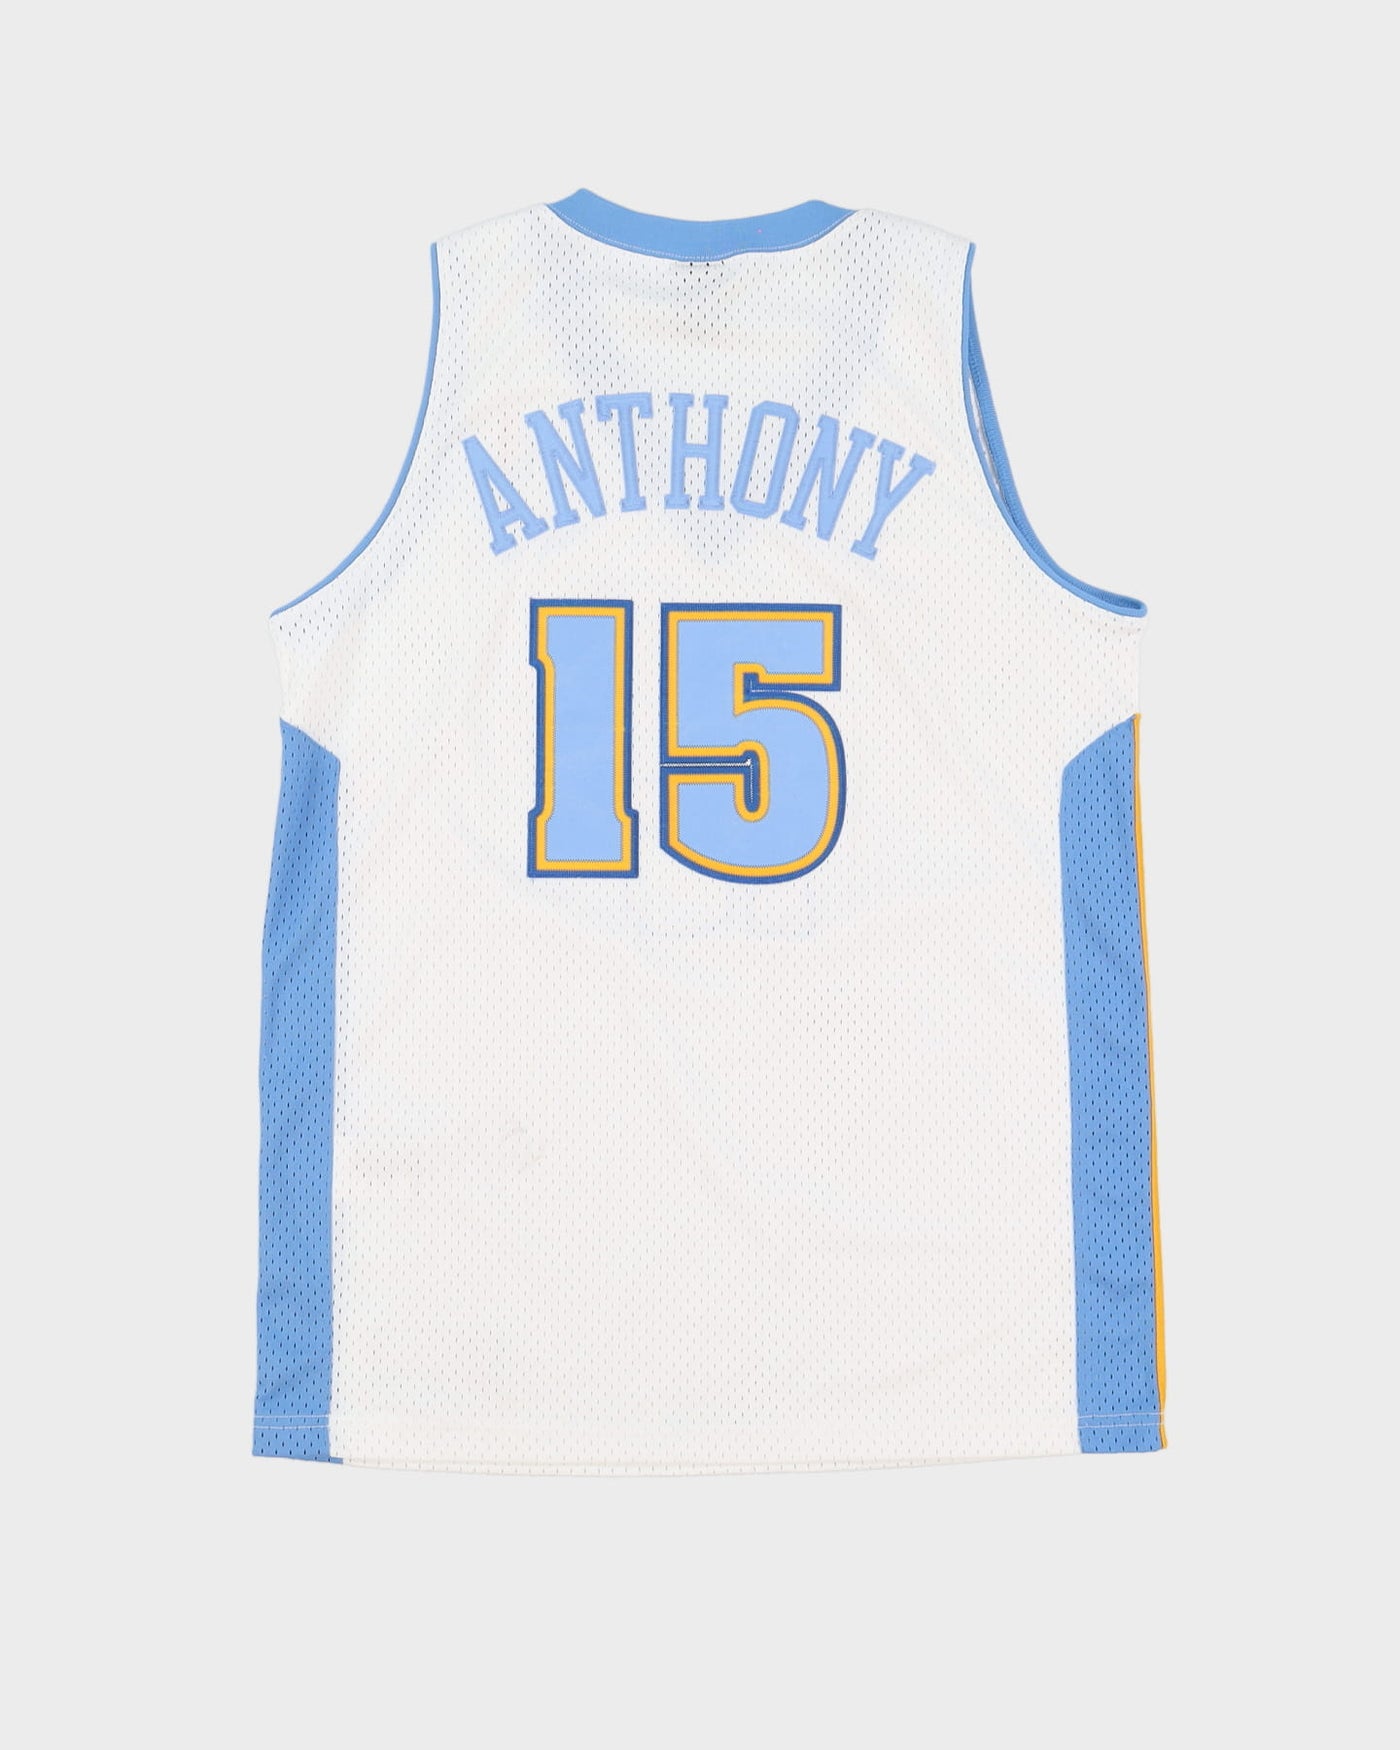 00s Carmelo Anthony #15 Denver Nuggets NBA Stitched White Basketball Jersey - M